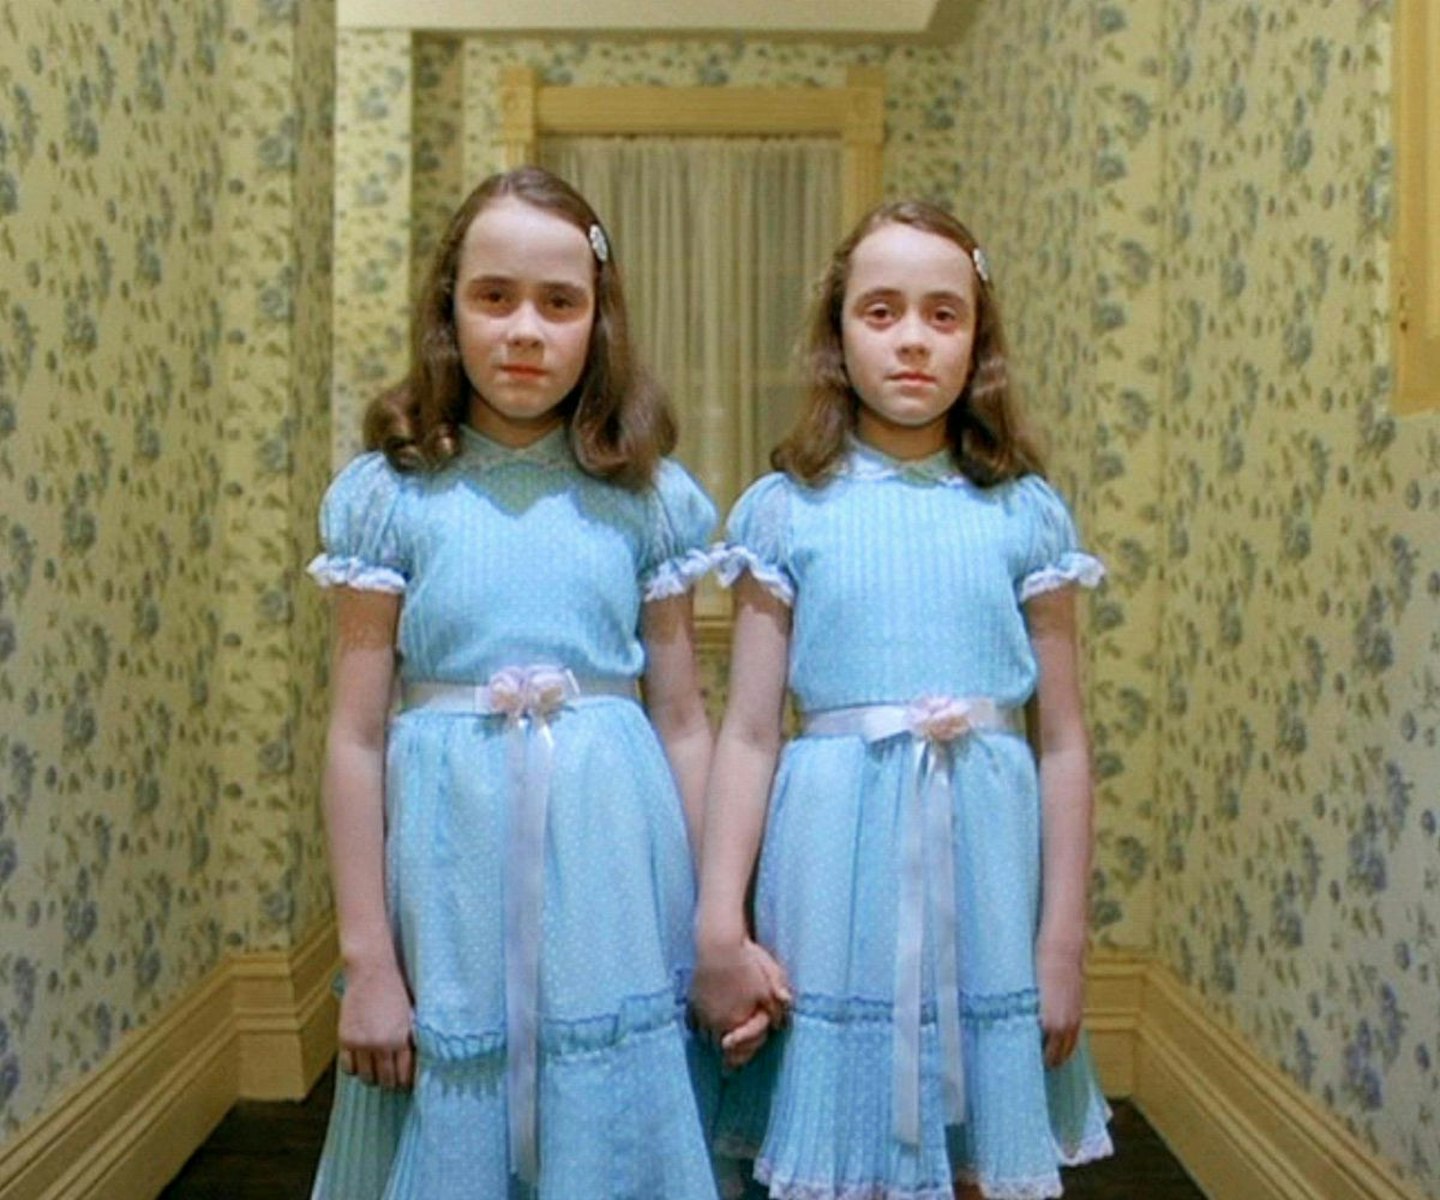 The Grady twins from The Shining